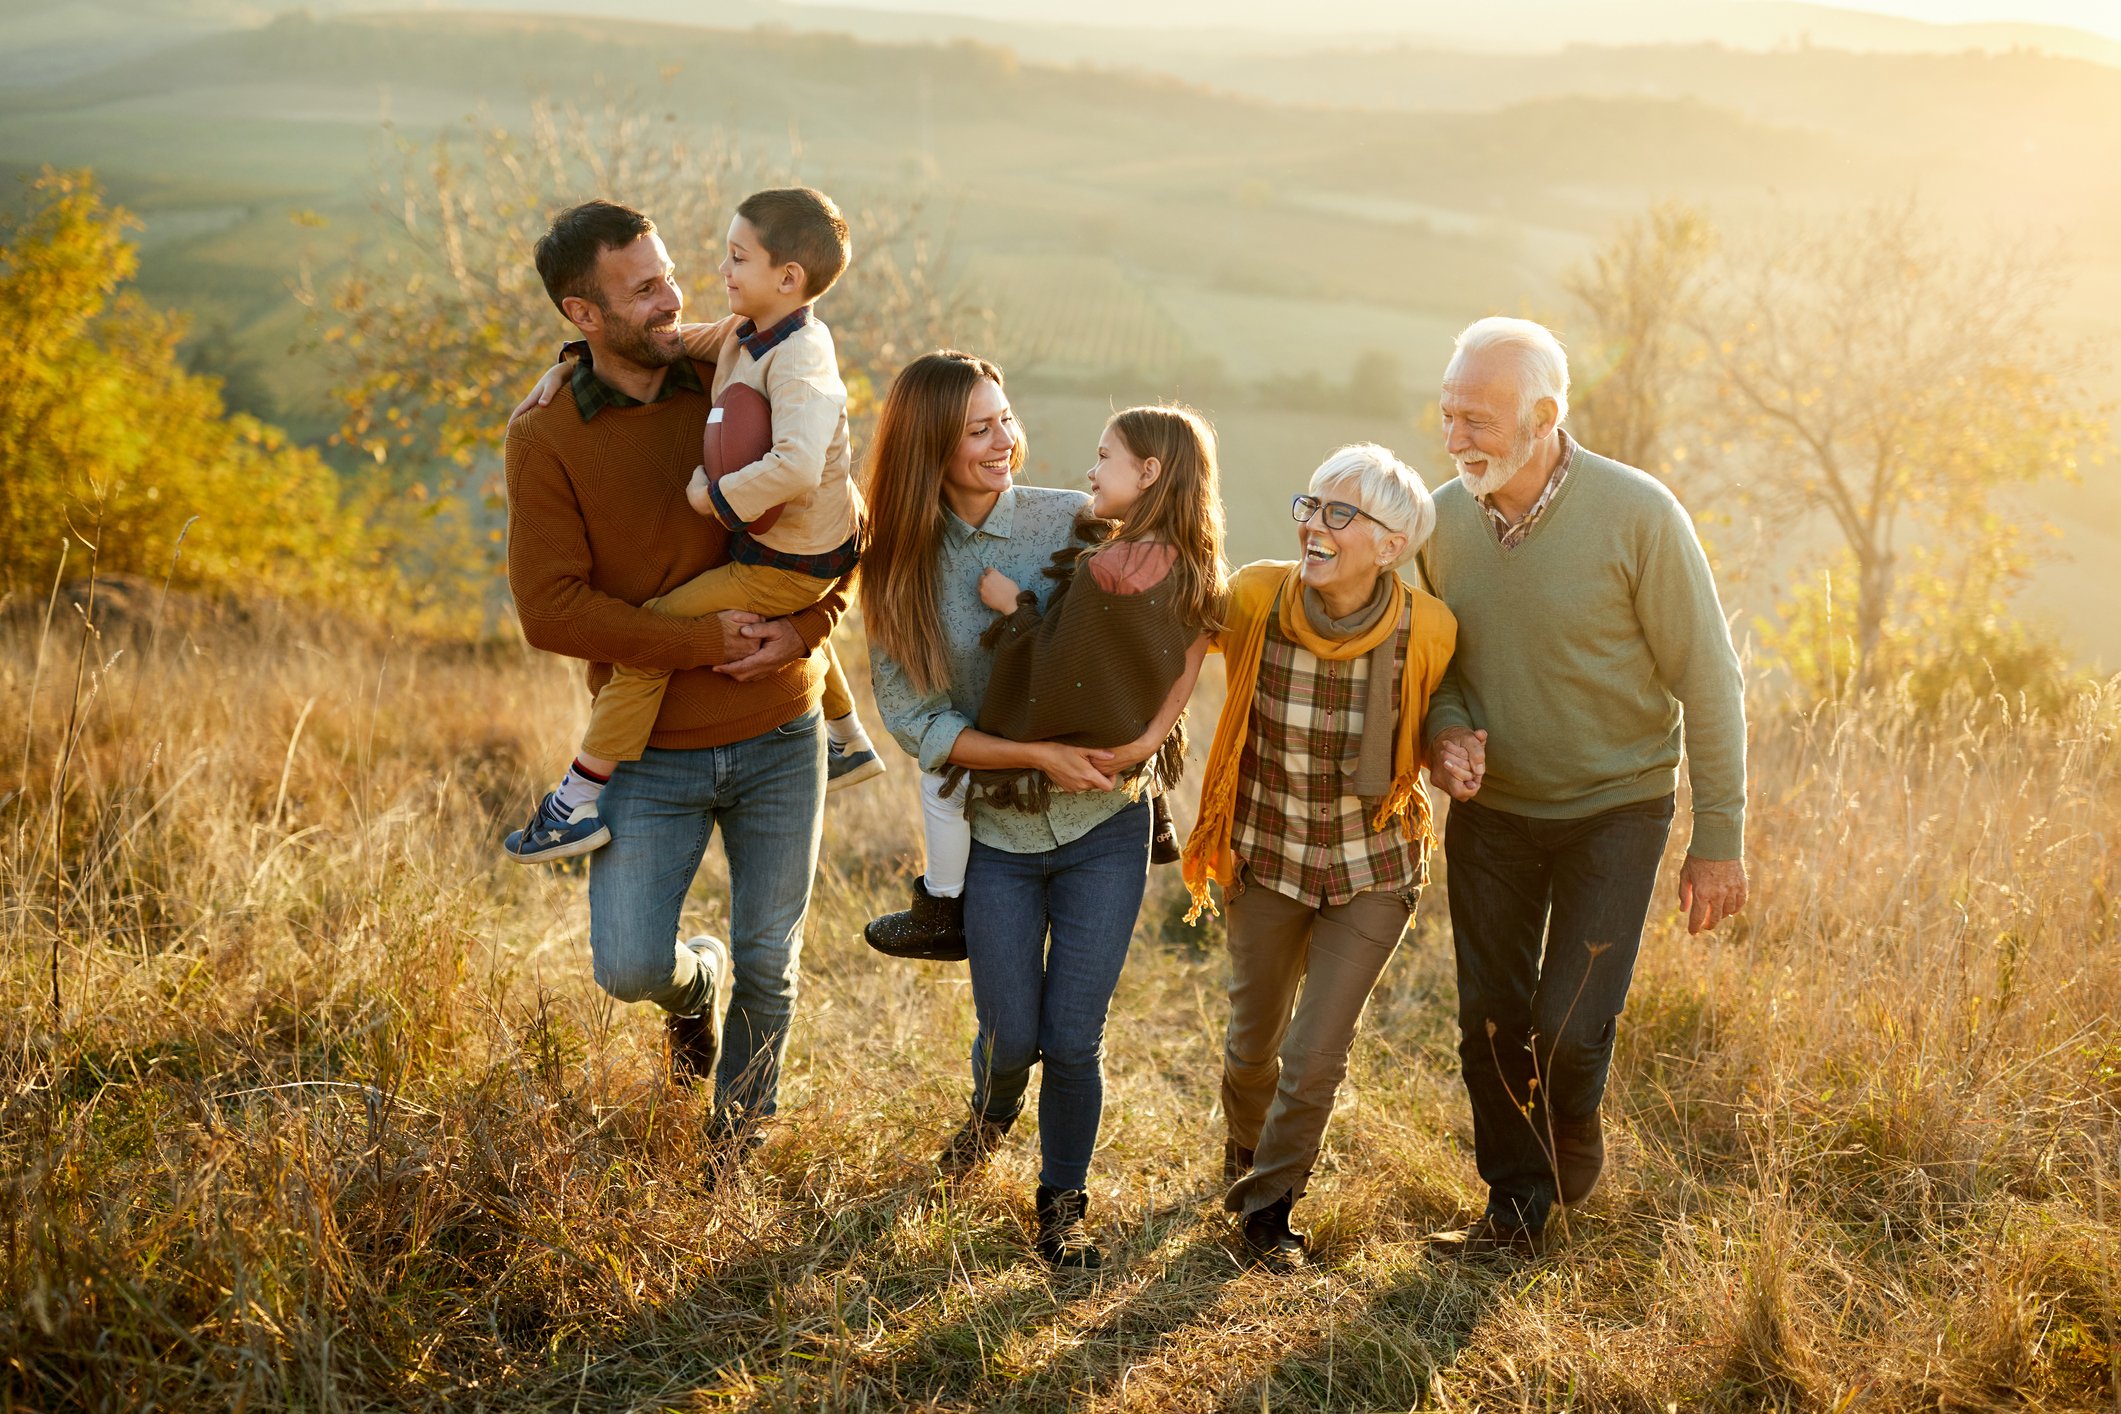 How to Practice Proper Legacy and Estate Planning